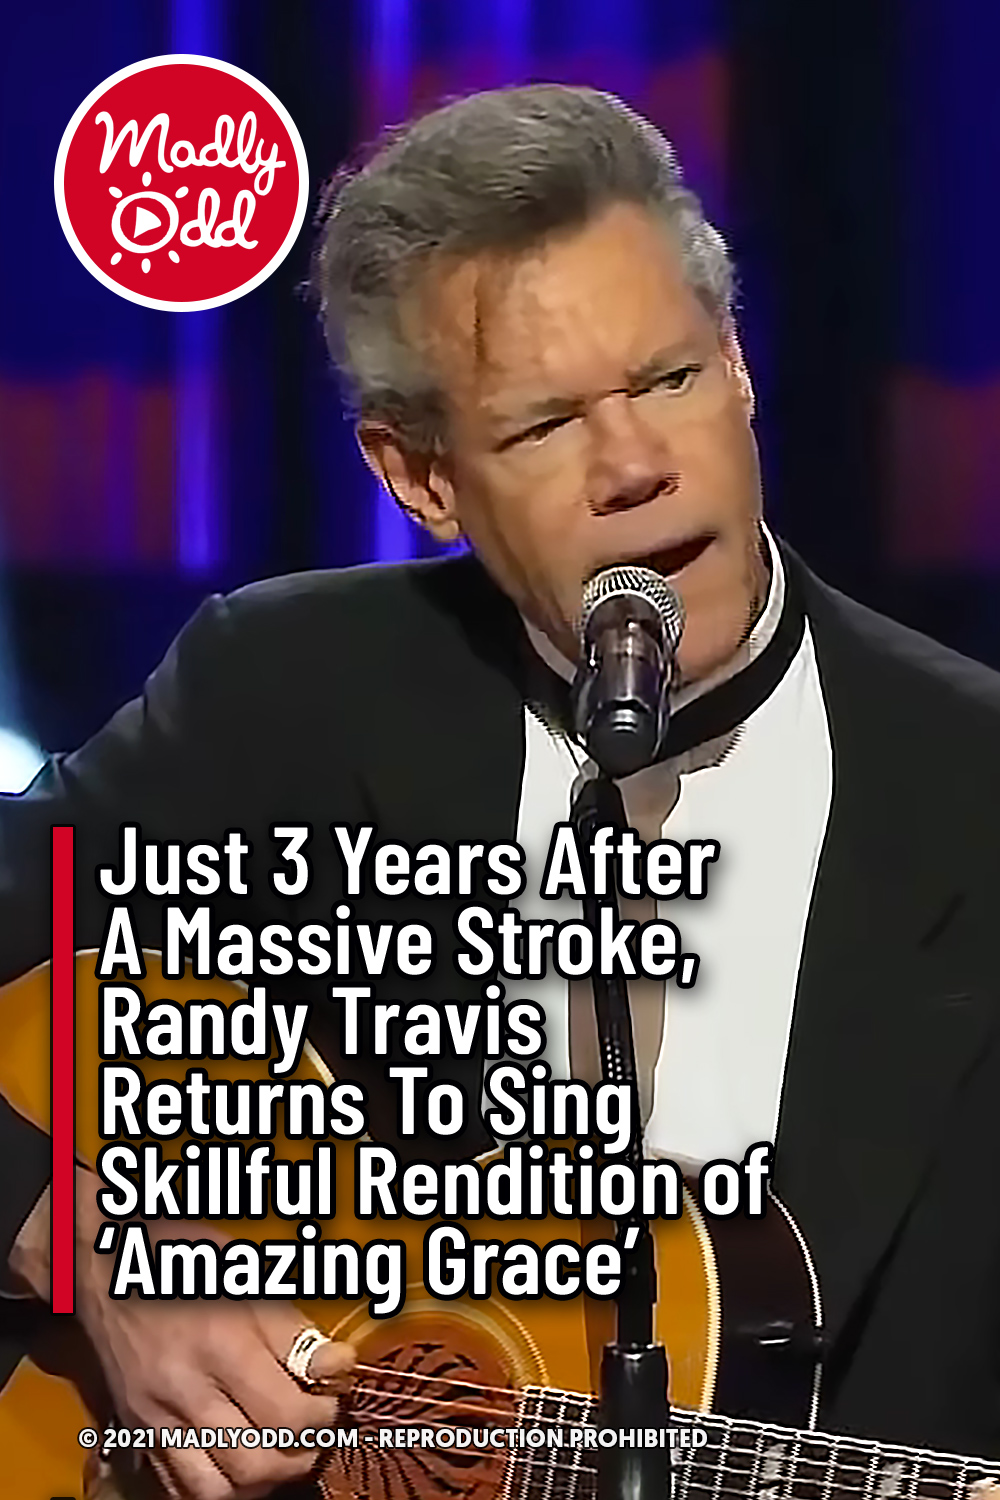 Just 3 Years After A Massive Stroke, Randy Travis Returns To Sing Skillful Rendition of ‘Amazing Grace’